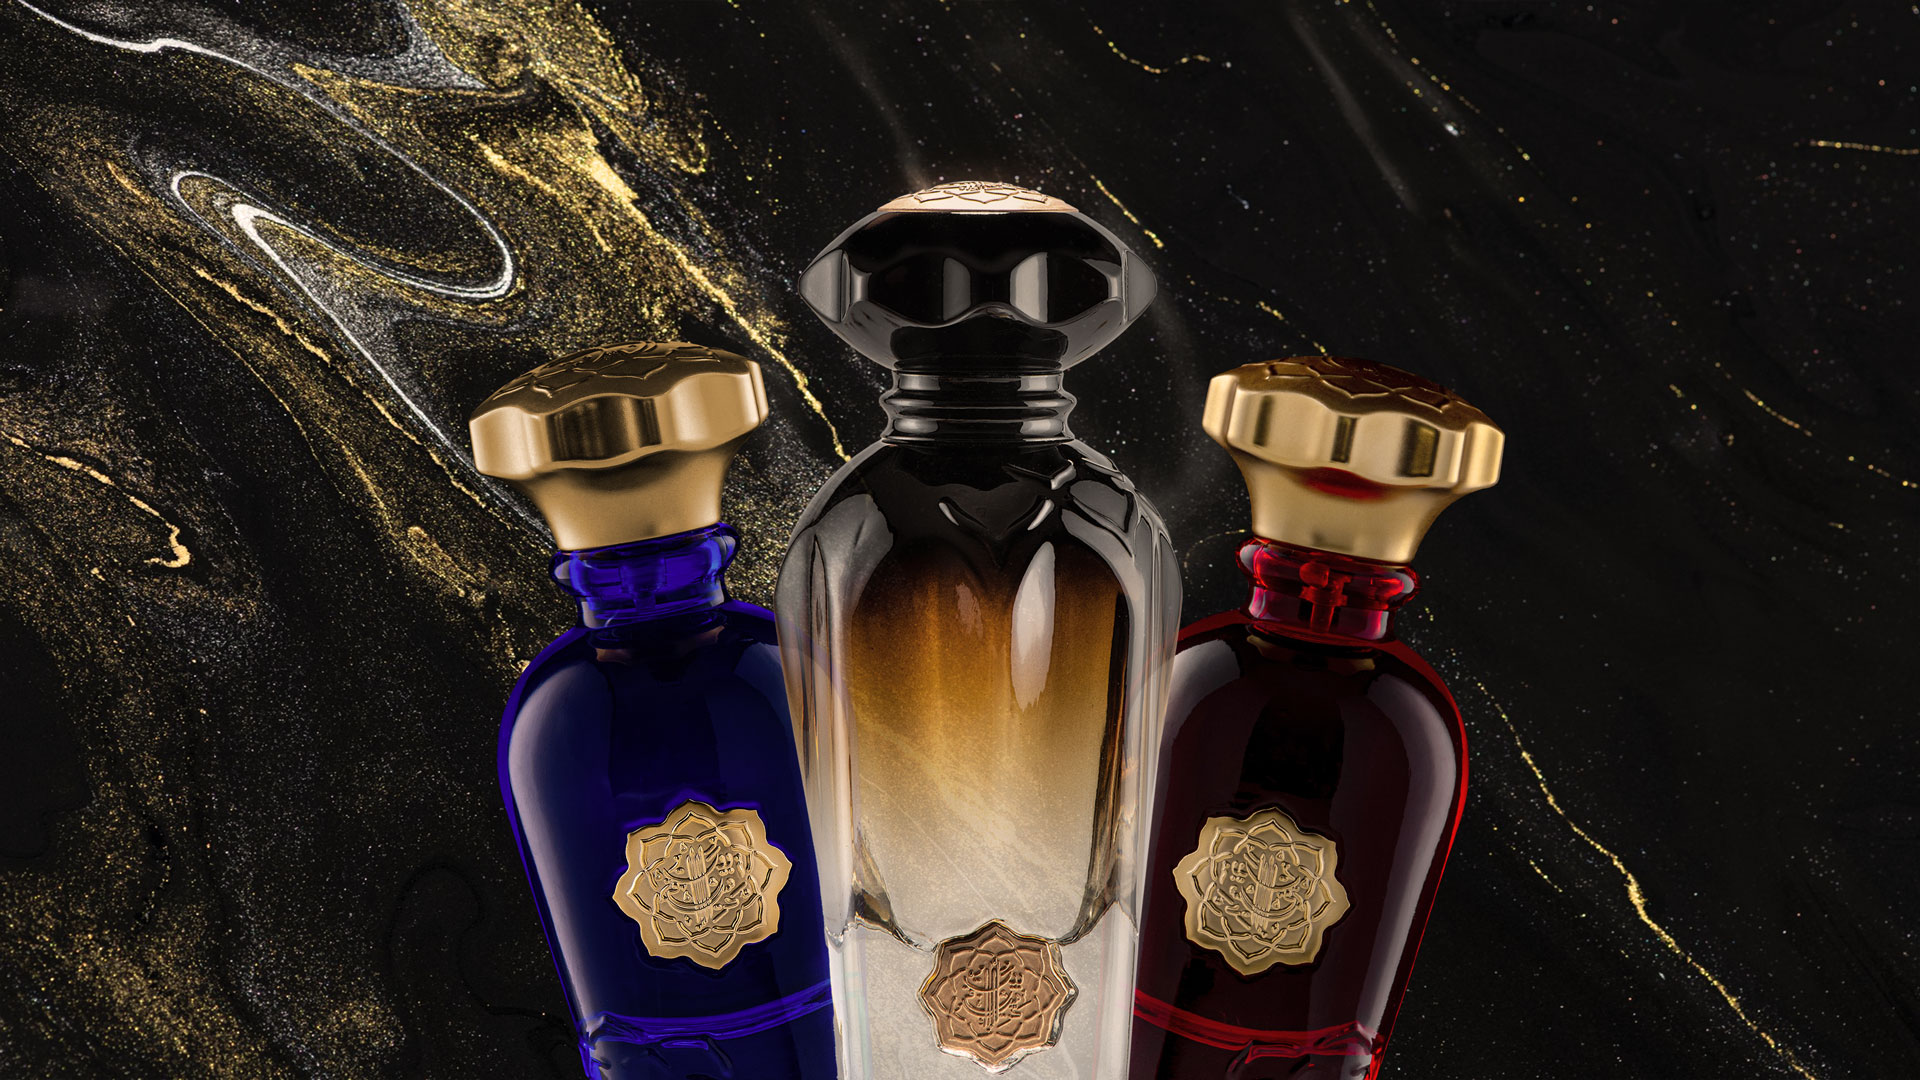 Buy Boadicea the Victorious Perfumes and Explore the Different Fragrances Available